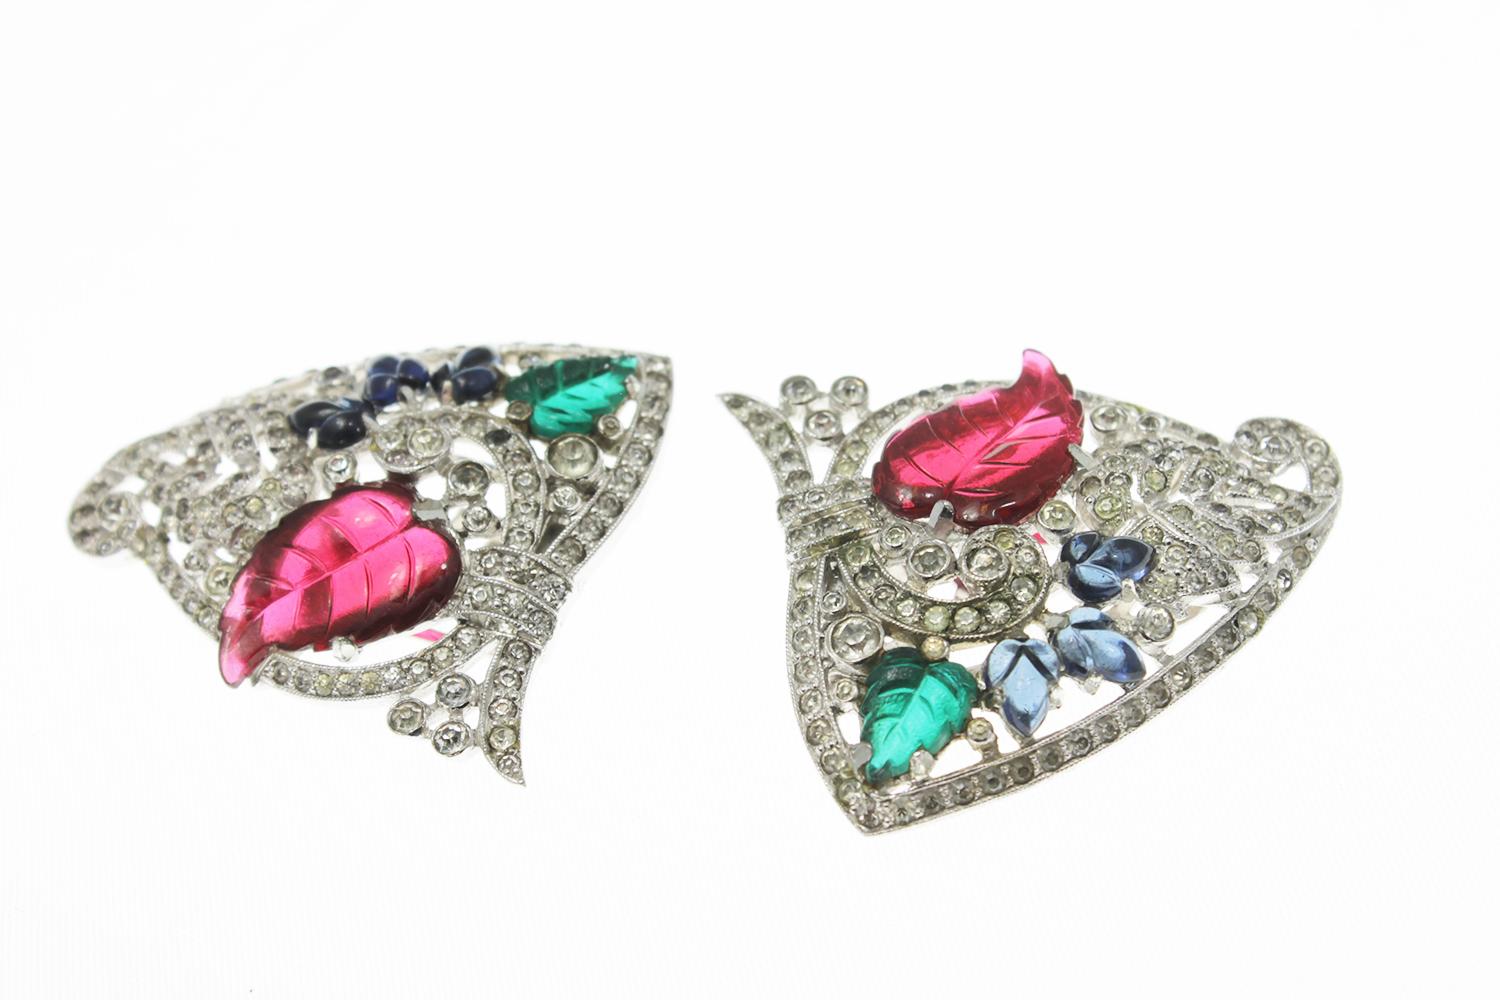 Influenced by Cartier's Art Deco Tutti Frutti era, these rhodium-plated white metal costume dress clips are also from this era and are commonly referred to as a fruit salad duette. Featuring glass poured and molded leaves and clear rhinestones. They